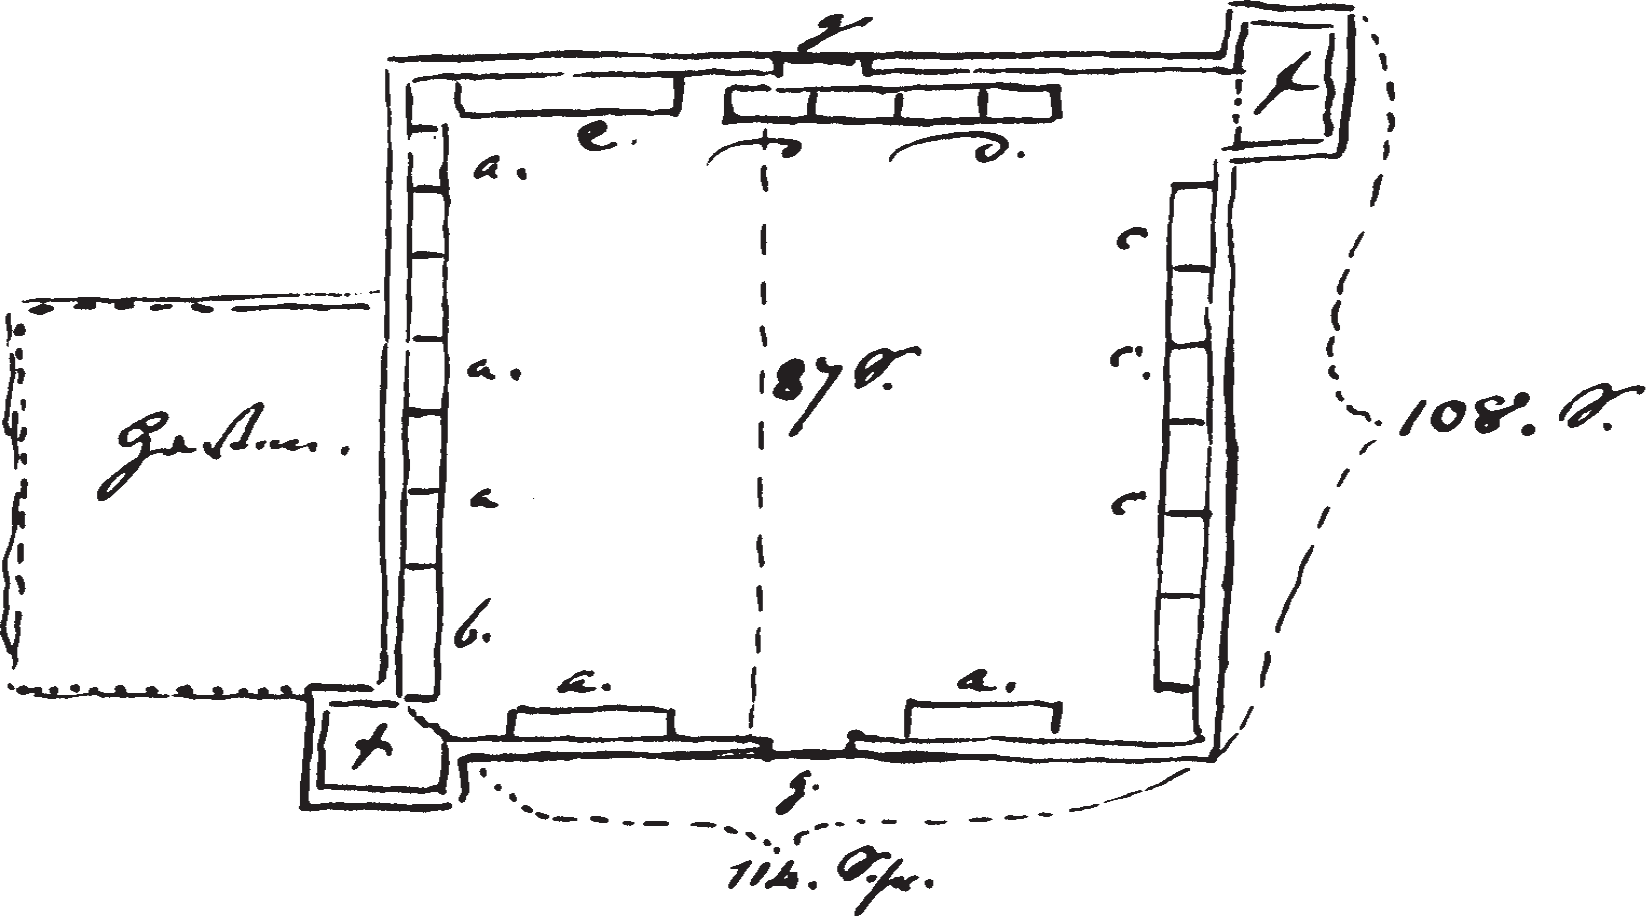 Figure 21.1. Plan of Fort Pierre: “‘a’ living quarters of the interpreters and the engagés; ‘b’ cattle barn; ‘c’ stores and warehouses; ‘d’ Mr. Laidlaw’s house with dining room and guest rooms; ‘e’ living quarters and office of the first clerk , Mr. Halsey; ‘f’ blockhouses; ‘g’ both gates of the fort.